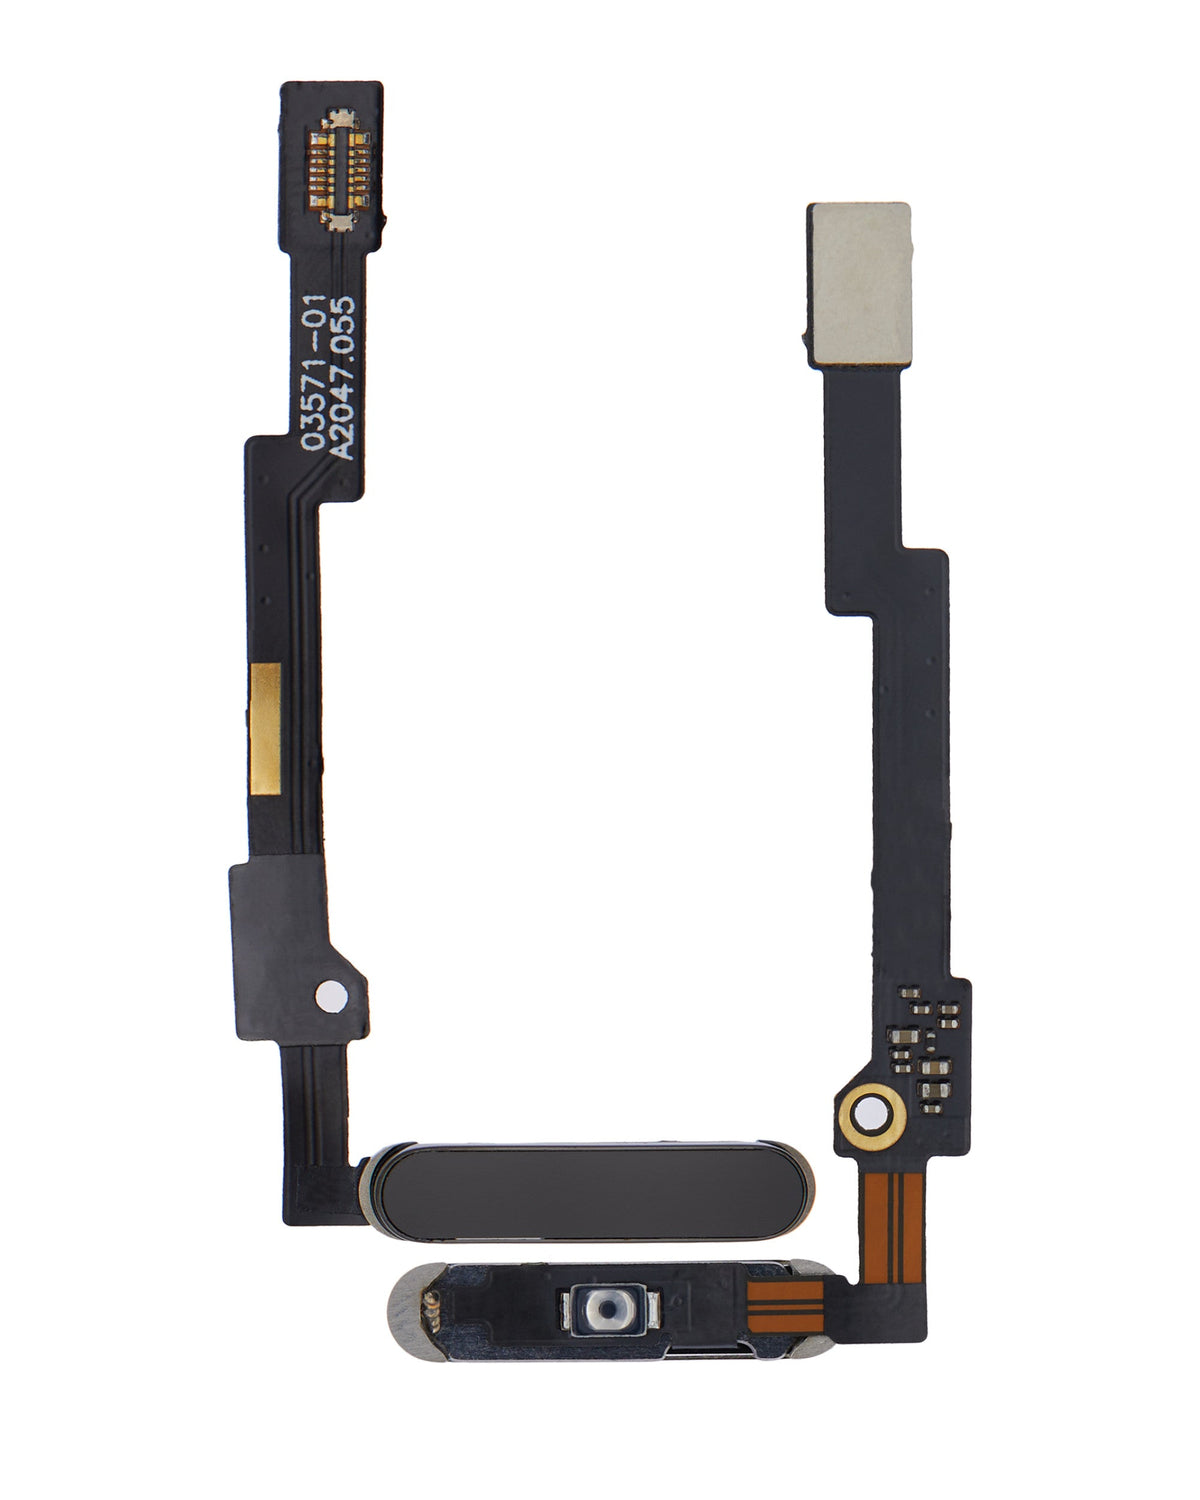 SPACE GRAY POWER BUTTON FLEX CABLE FOR IPAD MINI 6